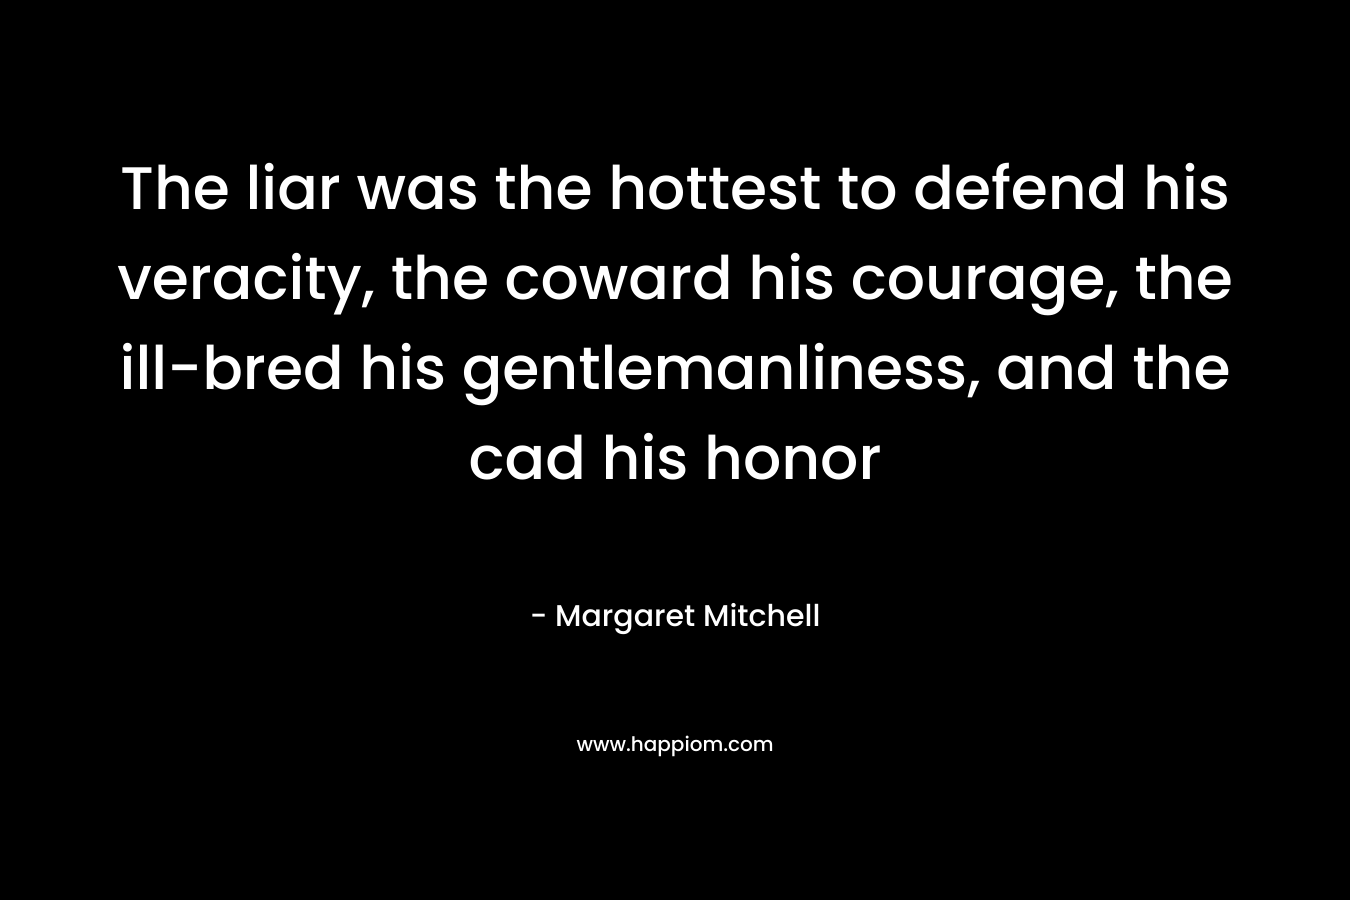 The liar was the hottest to defend his veracity, the coward his courage, the ill-bred his gentlemanliness, and the cad his honor